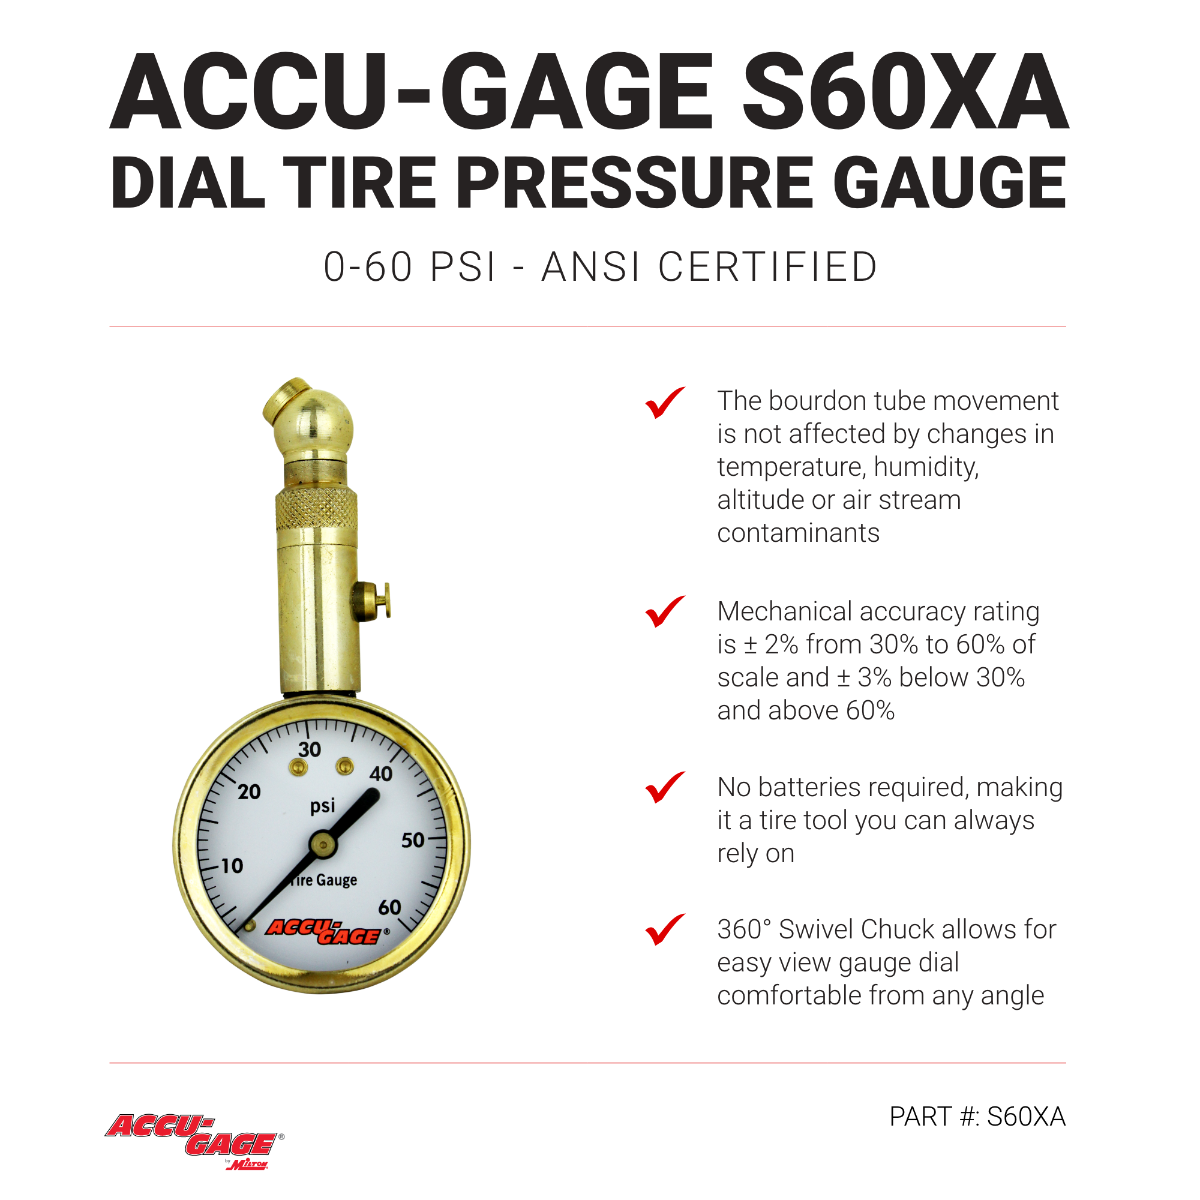 ACCU-GAGE® by Milton® Dial Tire Pressure Gauge with Swivel Angle Air Chuck - ANSI Certified for Motorcycle/Car/Truck Tires (0-60 PSI)